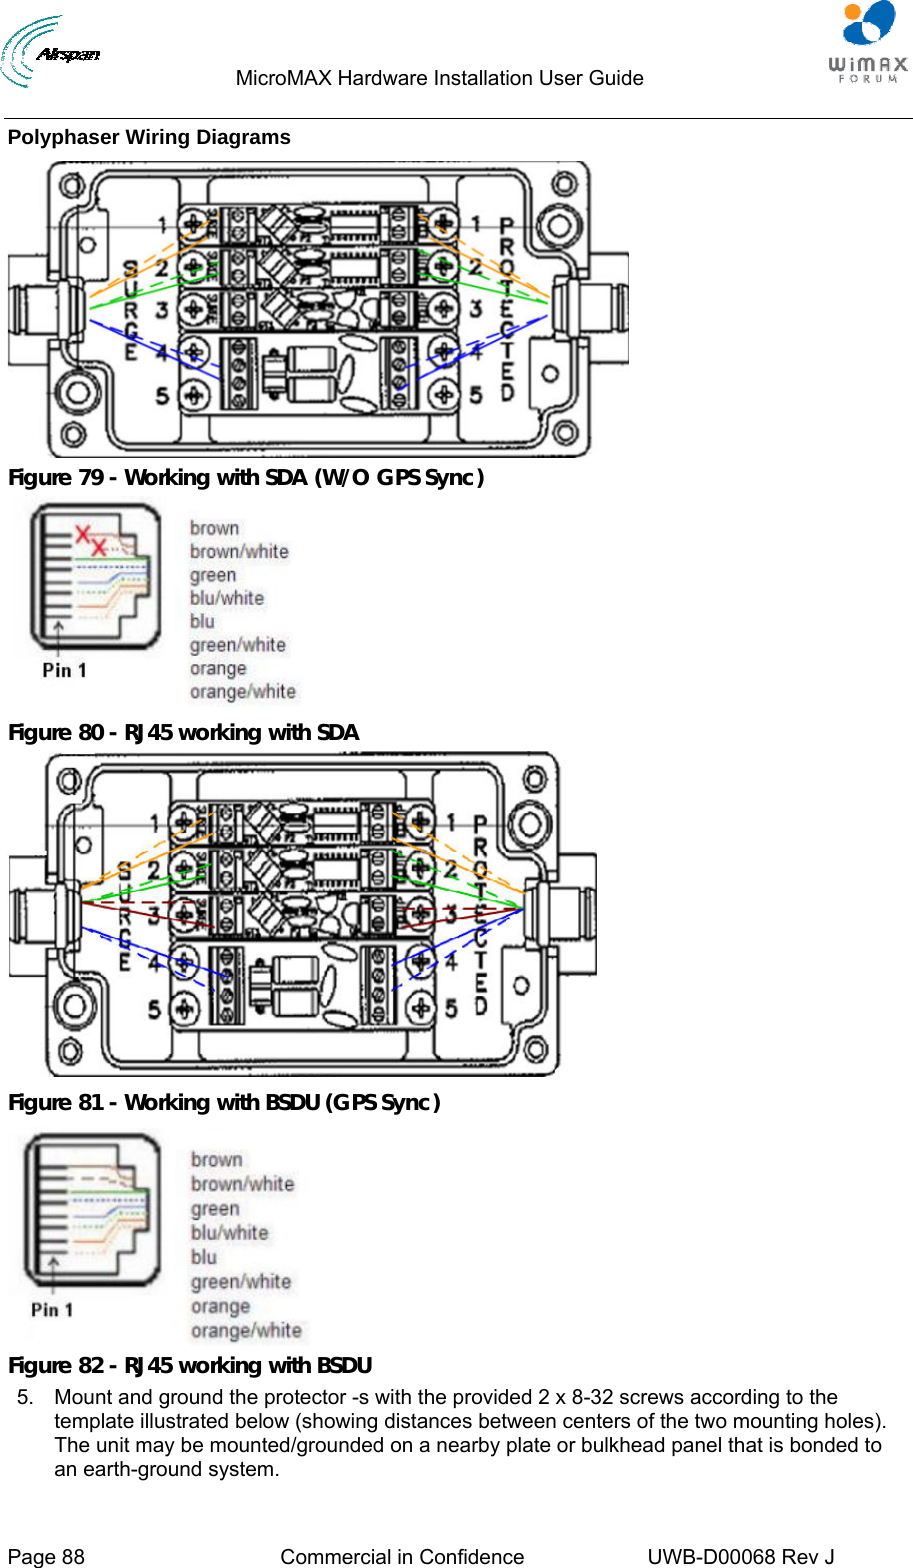                                  MicroMAX Hardware Installation User Guide     Page 88  Commercial in Confidence  UWB-D00068 Rev J   Polyphaser Wiring Diagrams  Figure 79 - Working with SDA (W/O GPS Sync)  Figure 80 - RJ45 working with SDA  Figure 81 - Working with BSDU (GPS Sync)  Figure 82 - RJ45 working with BSDU 5.  Mount and ground the protector -s with the provided 2 x 8-32 screws according to the template illustrated below (showing distances between centers of the two mounting holes). The unit may be mounted/grounded on a nearby plate or bulkhead panel that is bonded to an earth-ground system. 